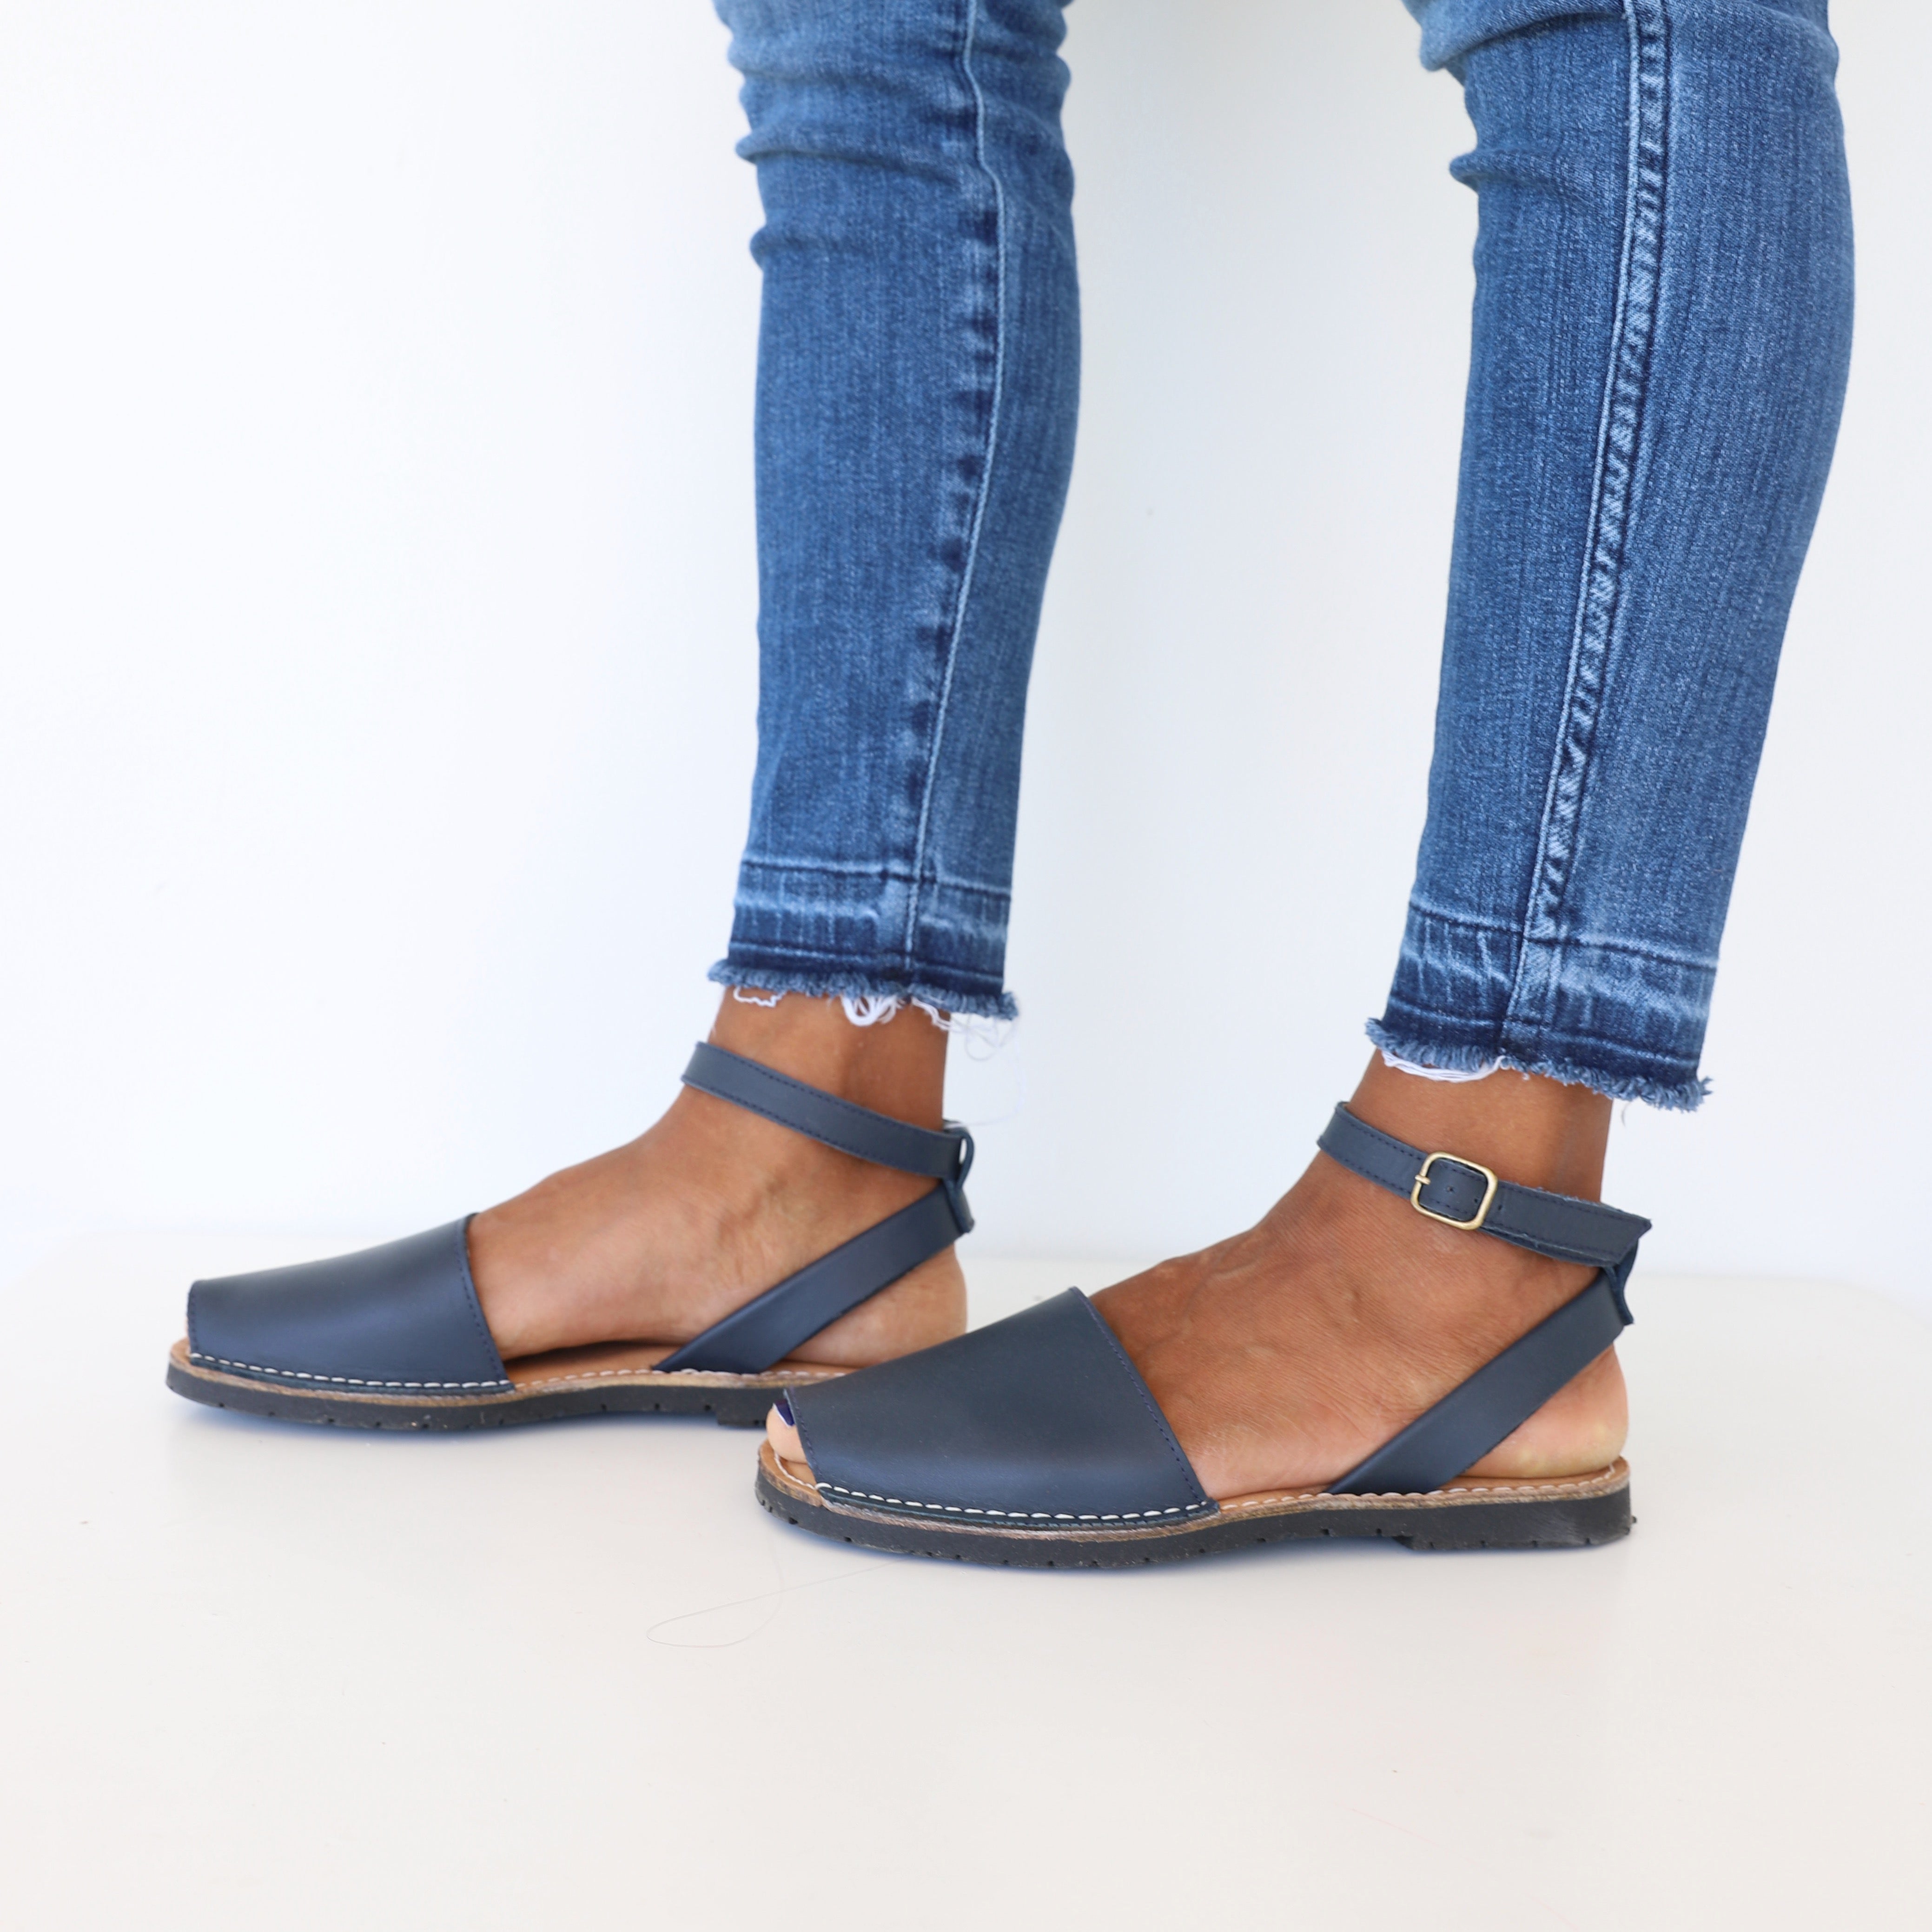 Navy blue sandals with strap